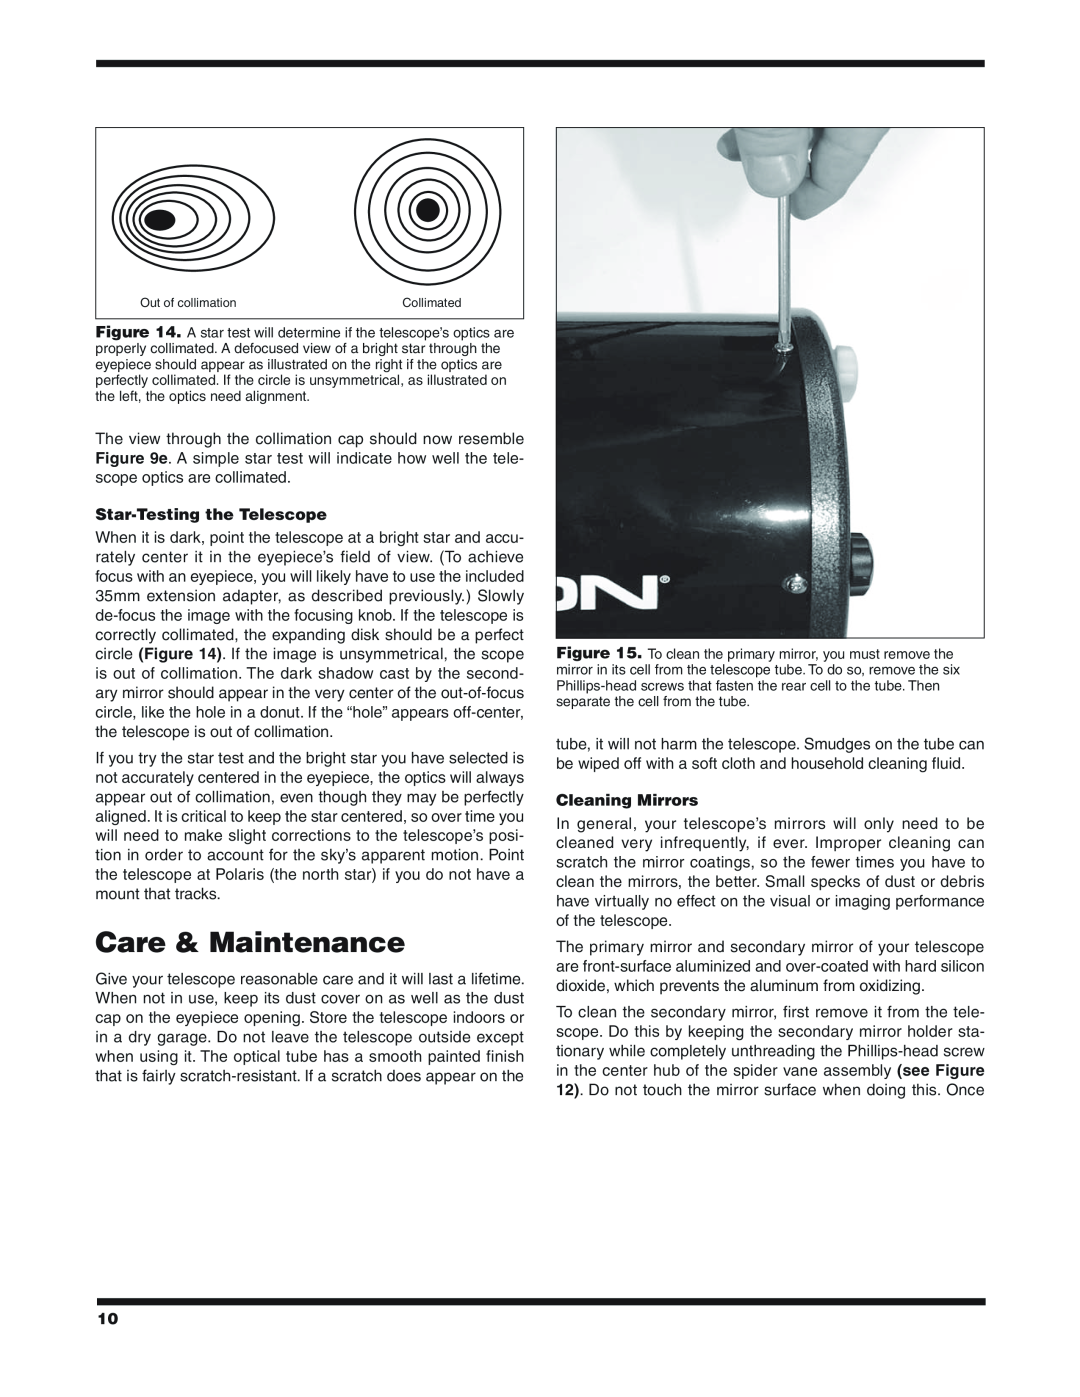 Orion 9527 instruction manual Care & Maintenance, Star-Testingthe Telescope, Cleaning Mirrors 